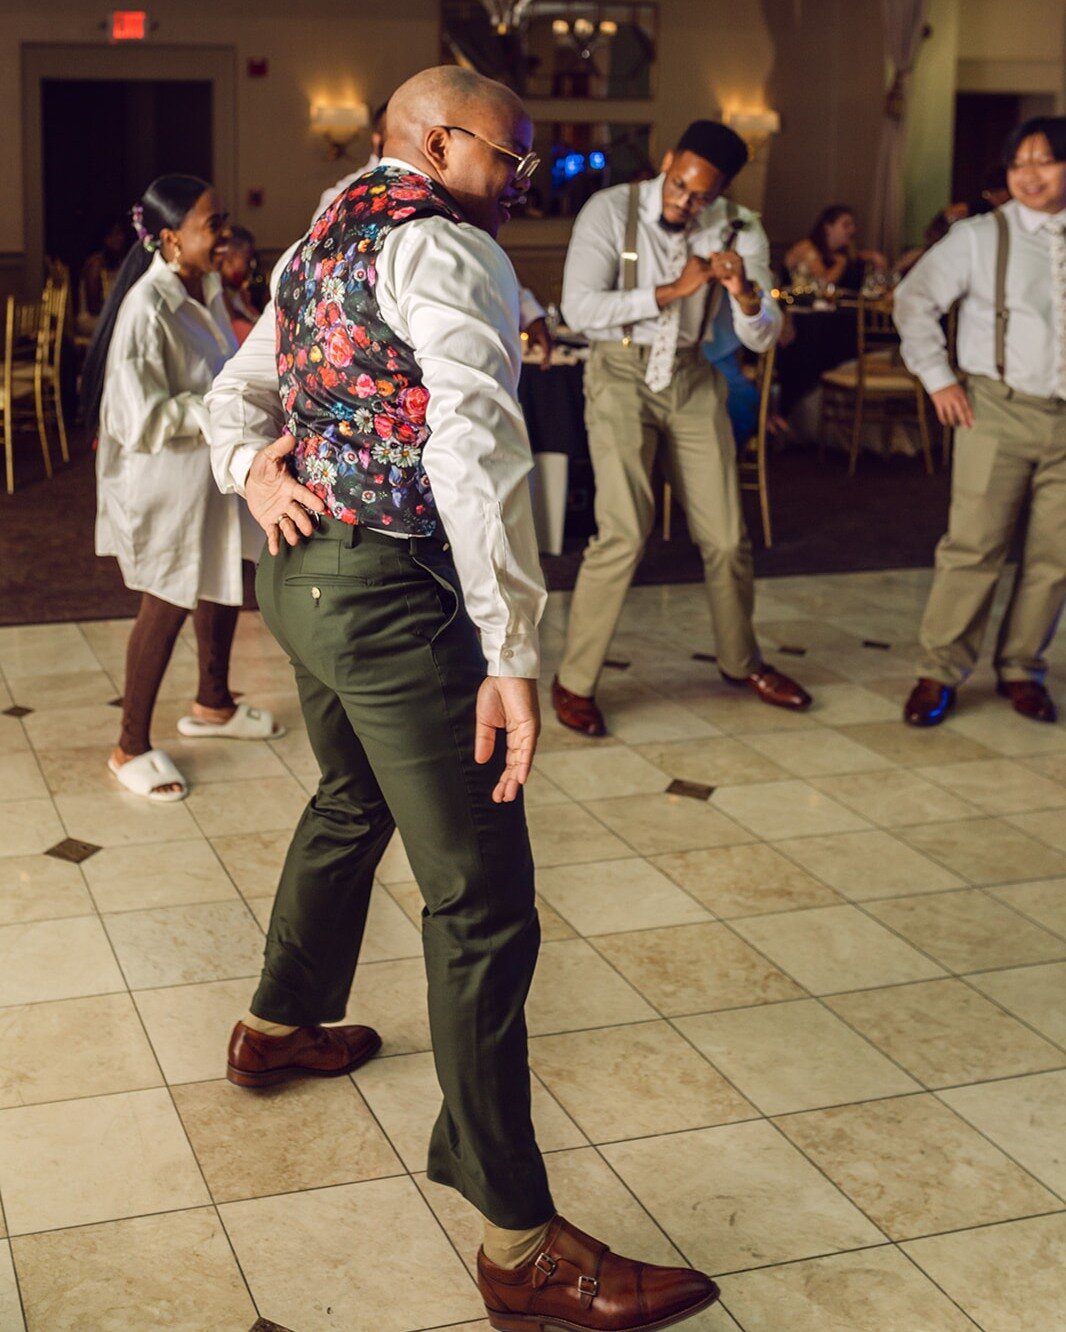 This is what good times looks like 

Photos by @heathermcbridephotography
Venue @talamoreweddings
Music @djjaymurch @onthebeatfx

#phillybride #phillyweddingvenues #talamoreweddings #talamorecountryclub #talamorecountryclubwedding